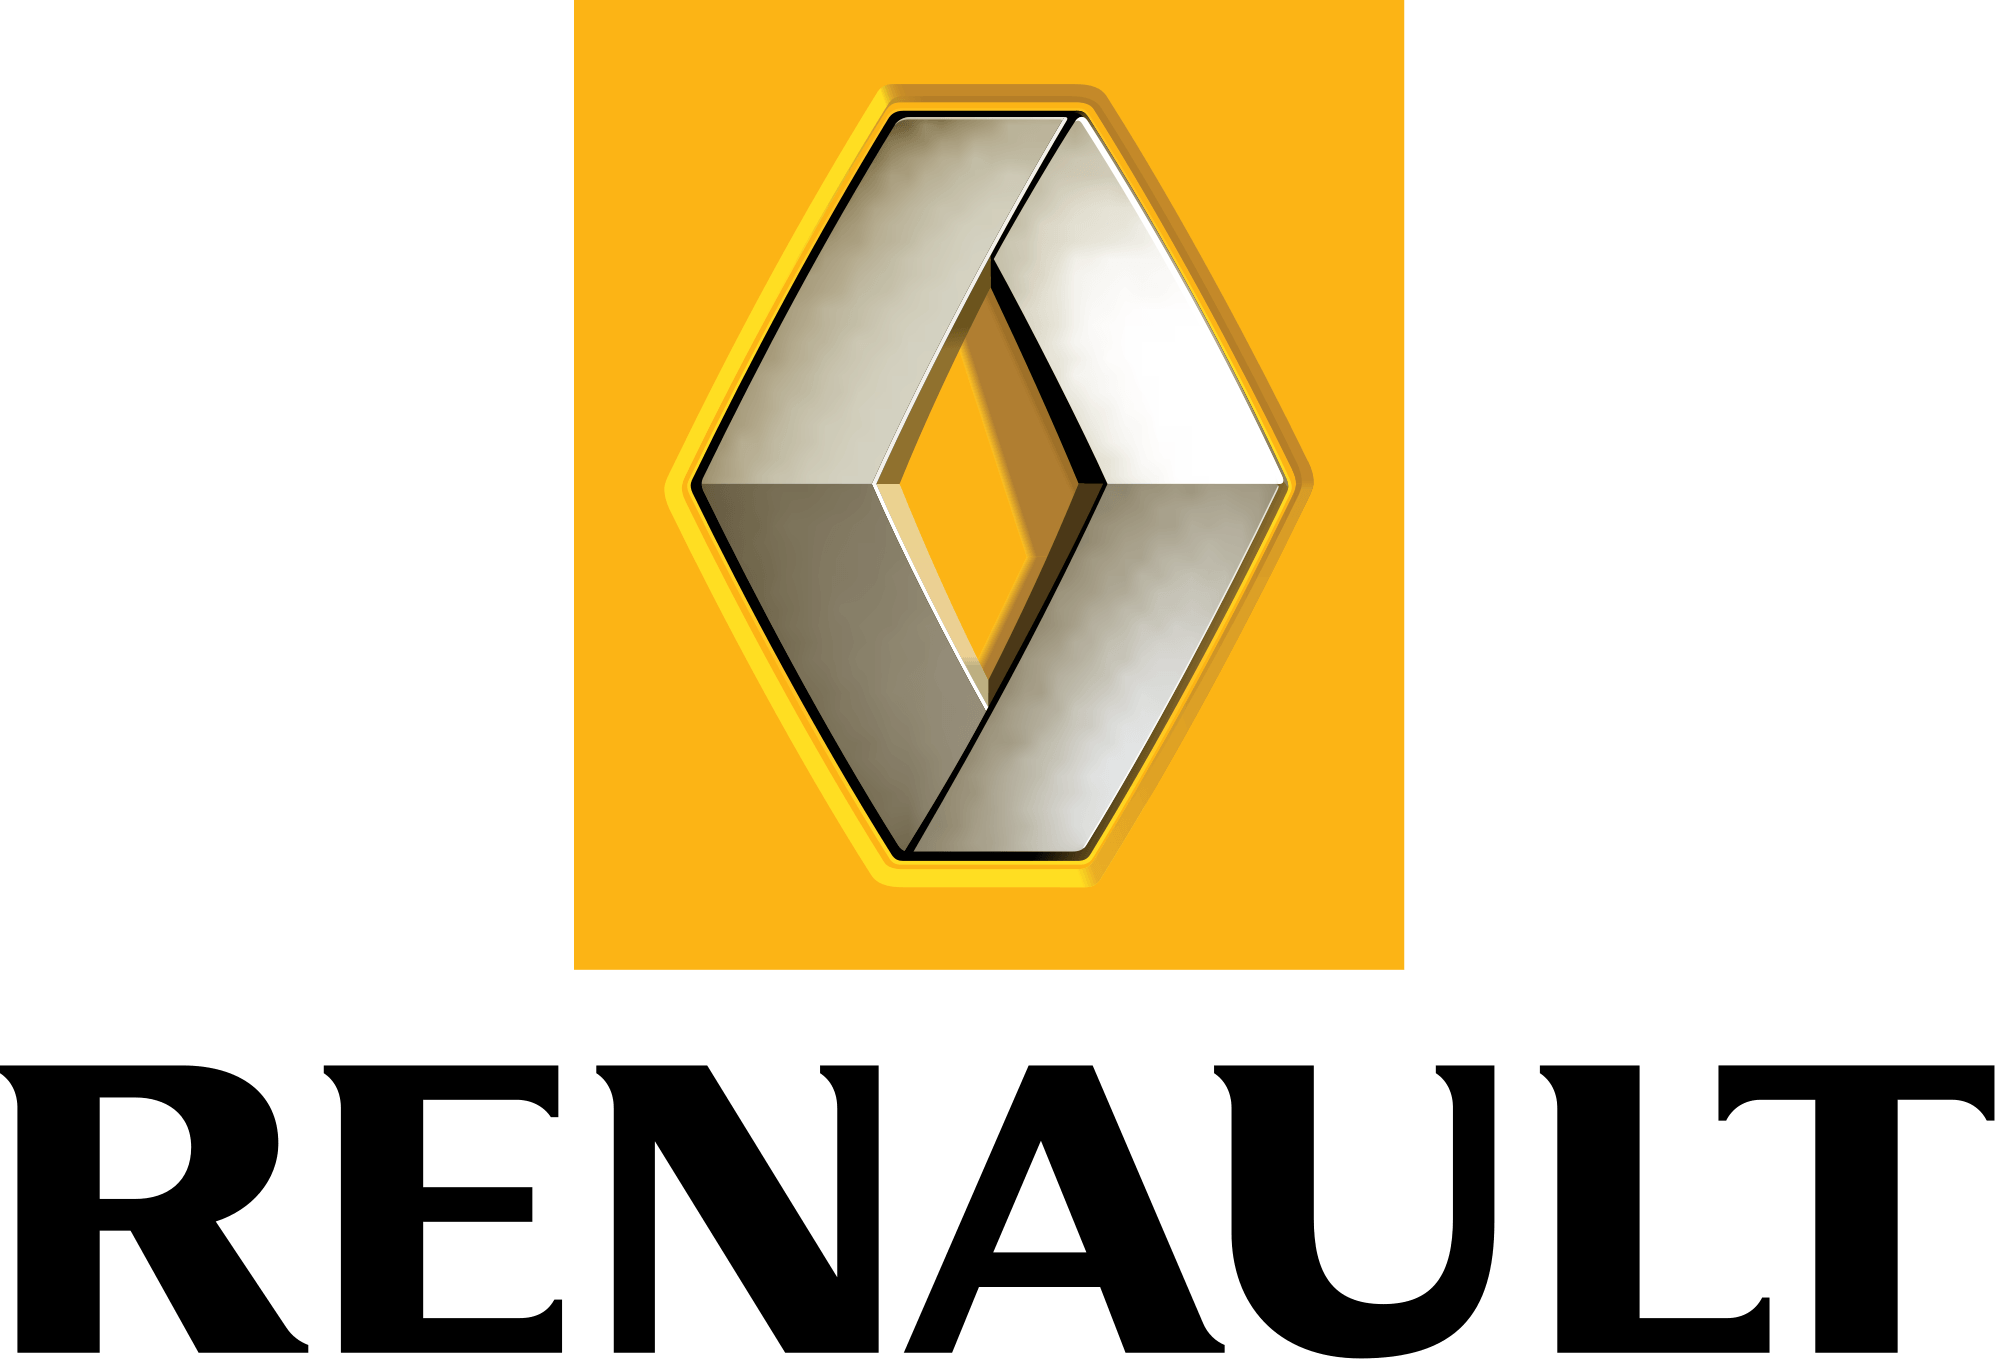 Yellow GMC Logo - Renault Logo, Renault Car Symbol Meaning and History | Car Brand ...